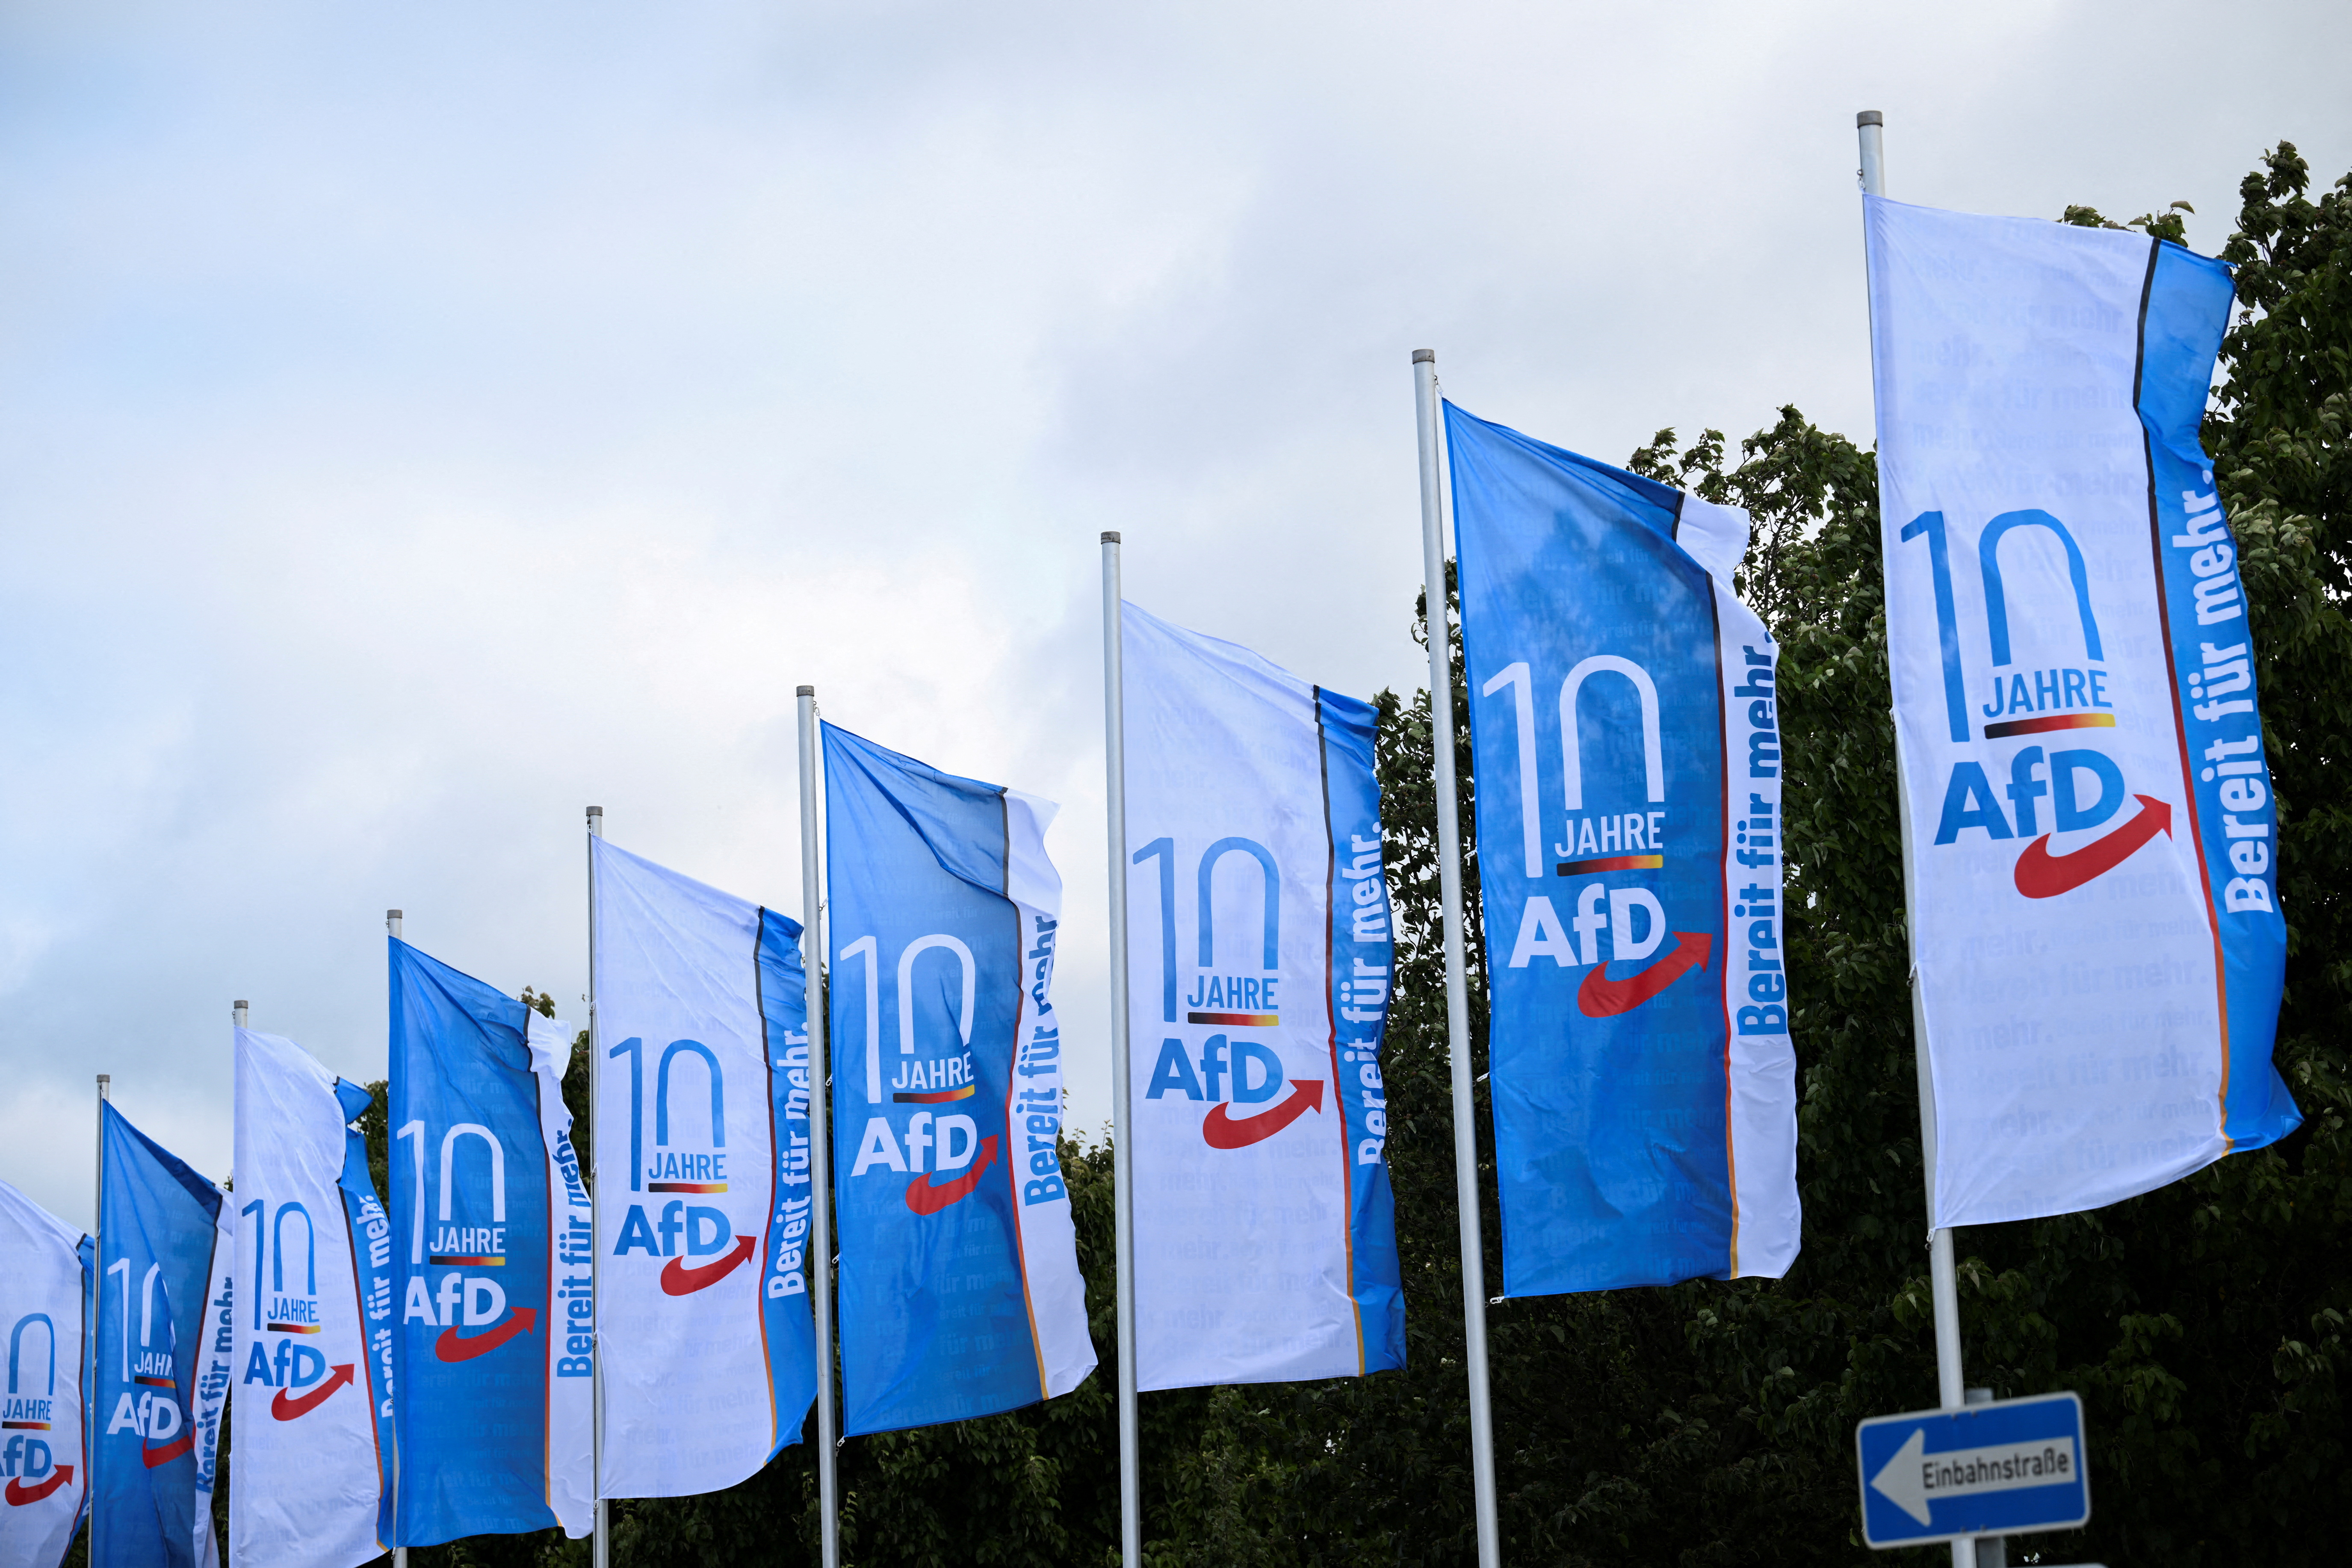 Alternative for Germany (AfD) party convention in Magdeburg